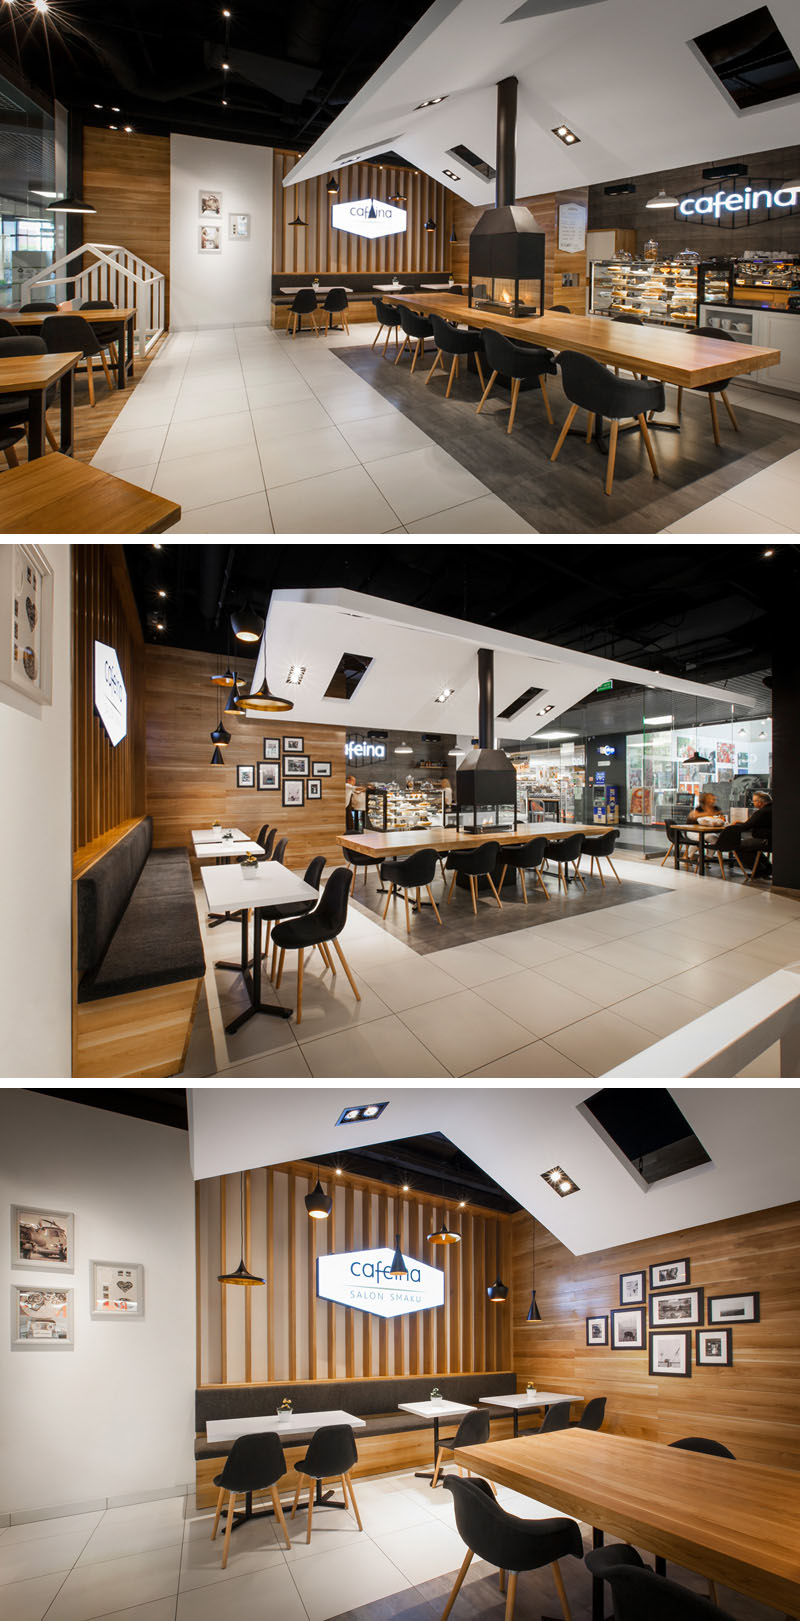 This cafe has a modern style and a cozy feel thanks to the centrally located fireplace and comfortable seating.